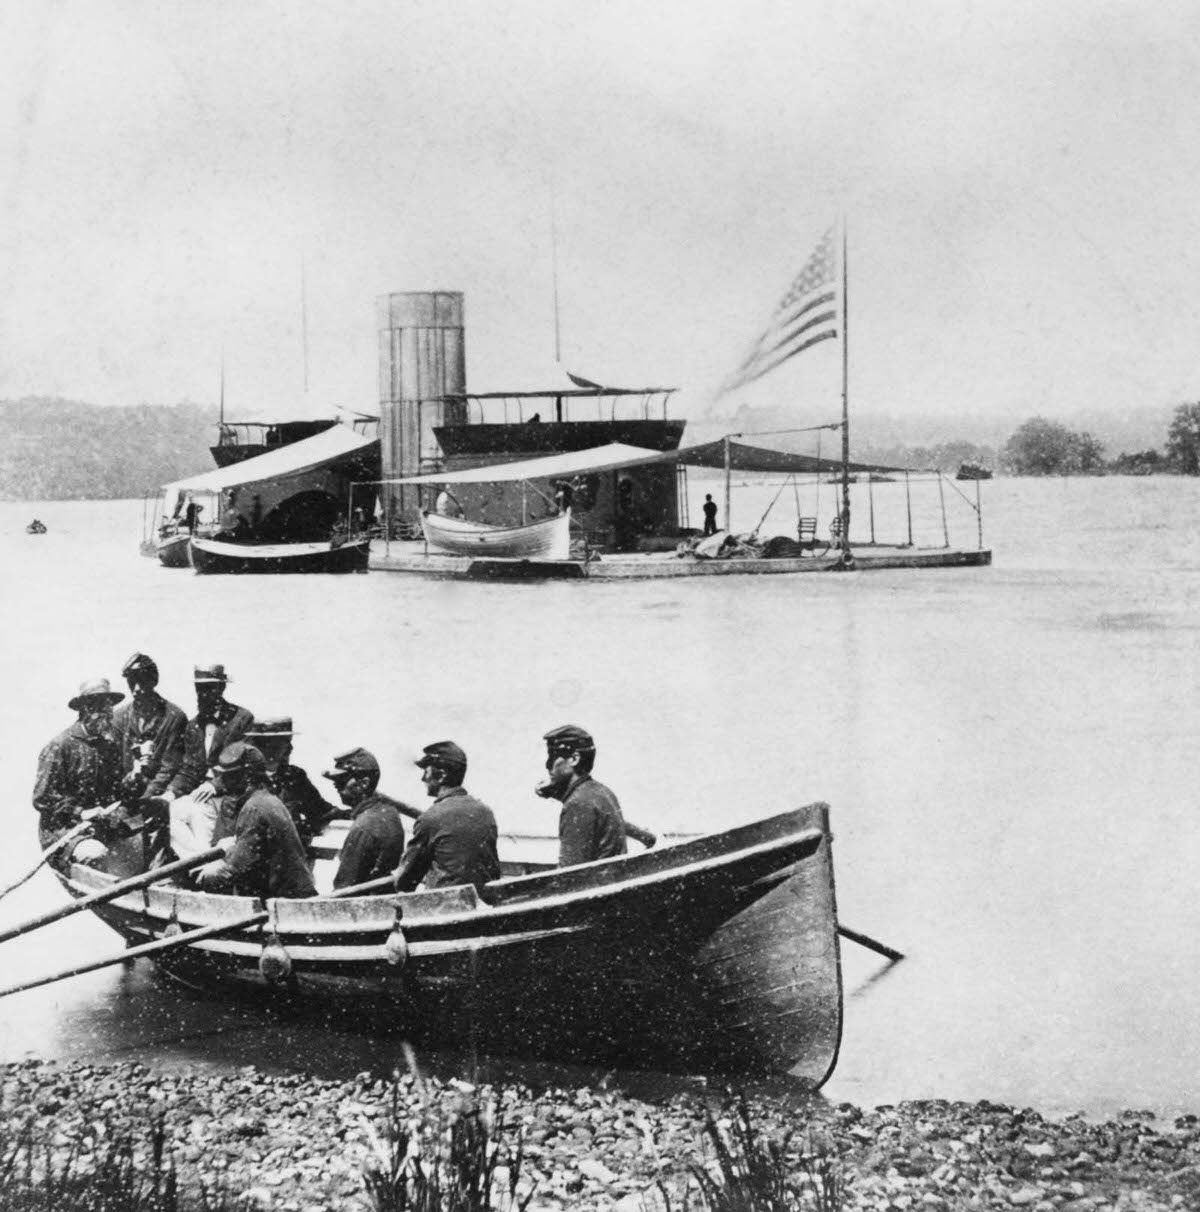 Union soldiers row out to the gunboat Onondaga on the James River near RIchmond, Virginia, 1862.